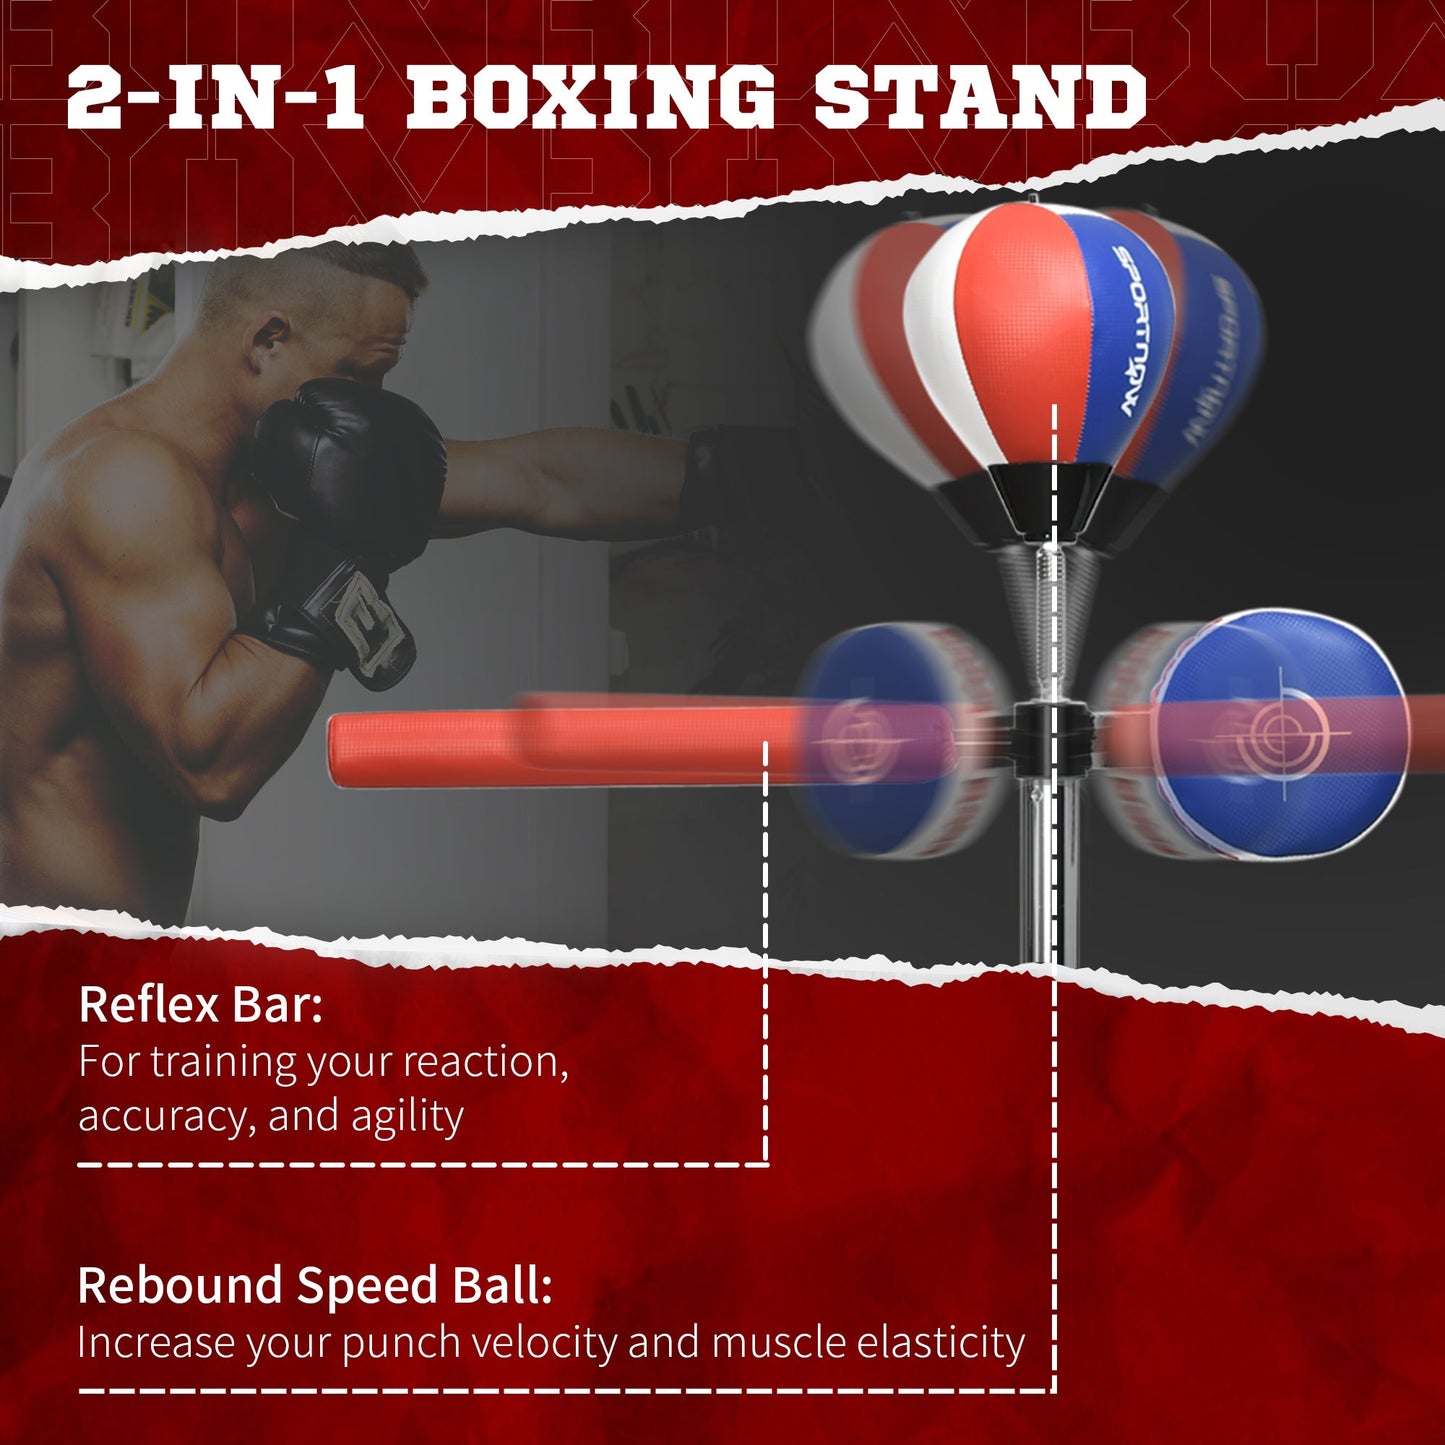 Miscellaneous-Free Standing Speed Bag, Adjustable Boxing Bag with Stand, Reflex Bar, Punching Pad and Suction Cup Base for Adults & Teenagers, Red and Blue - Outdoor Style Company